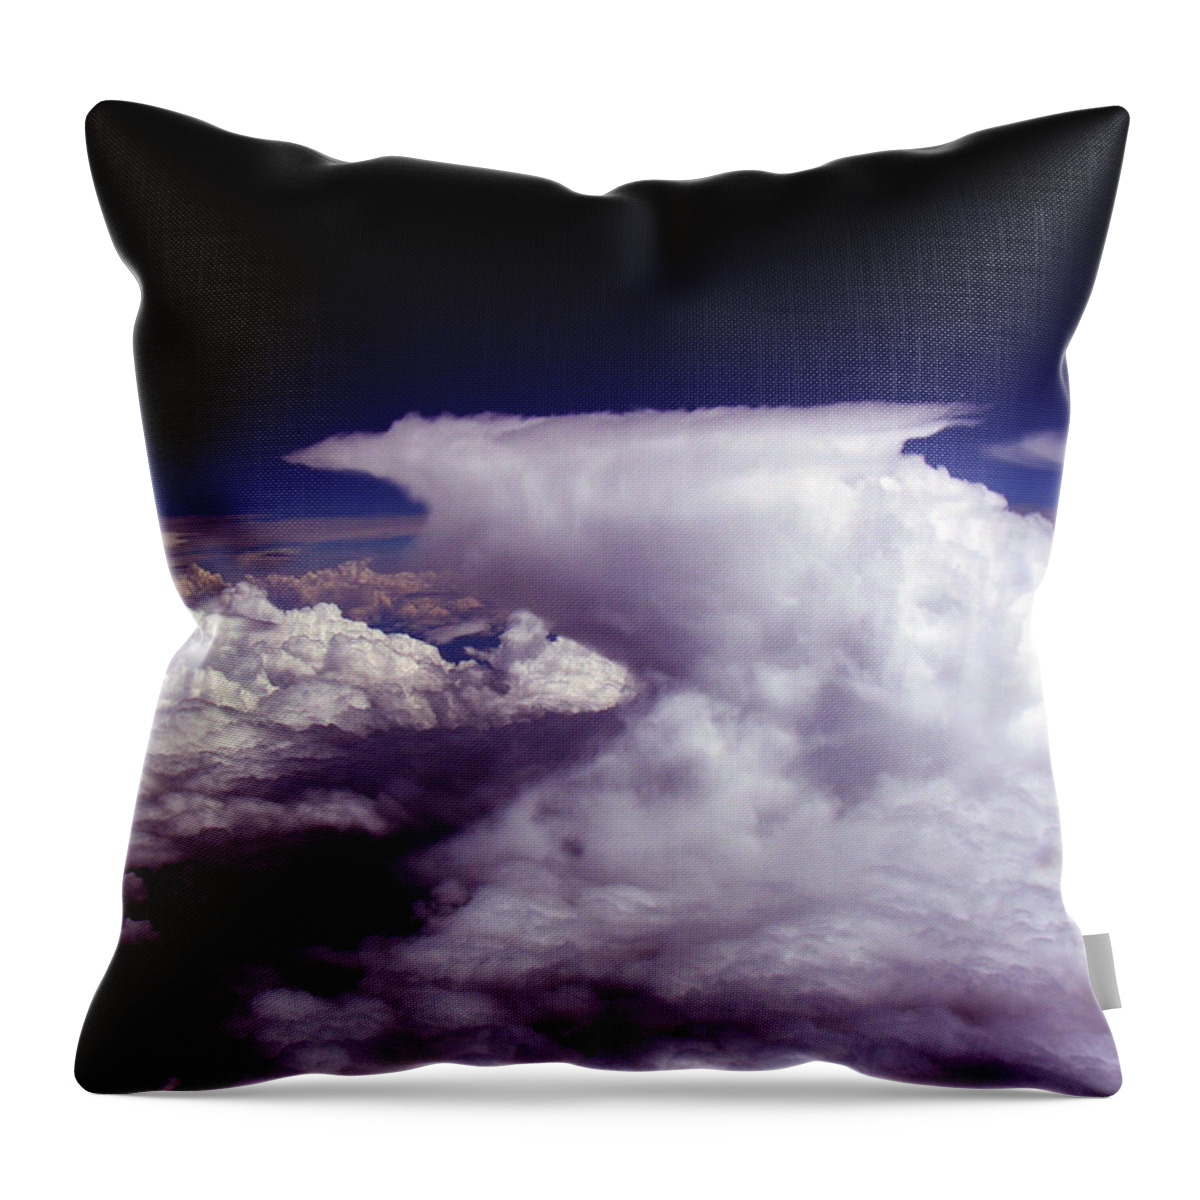 Aviation Art Throw Pillow featuring the photograph Cb2.16 by Strato ThreeSIXTYFive